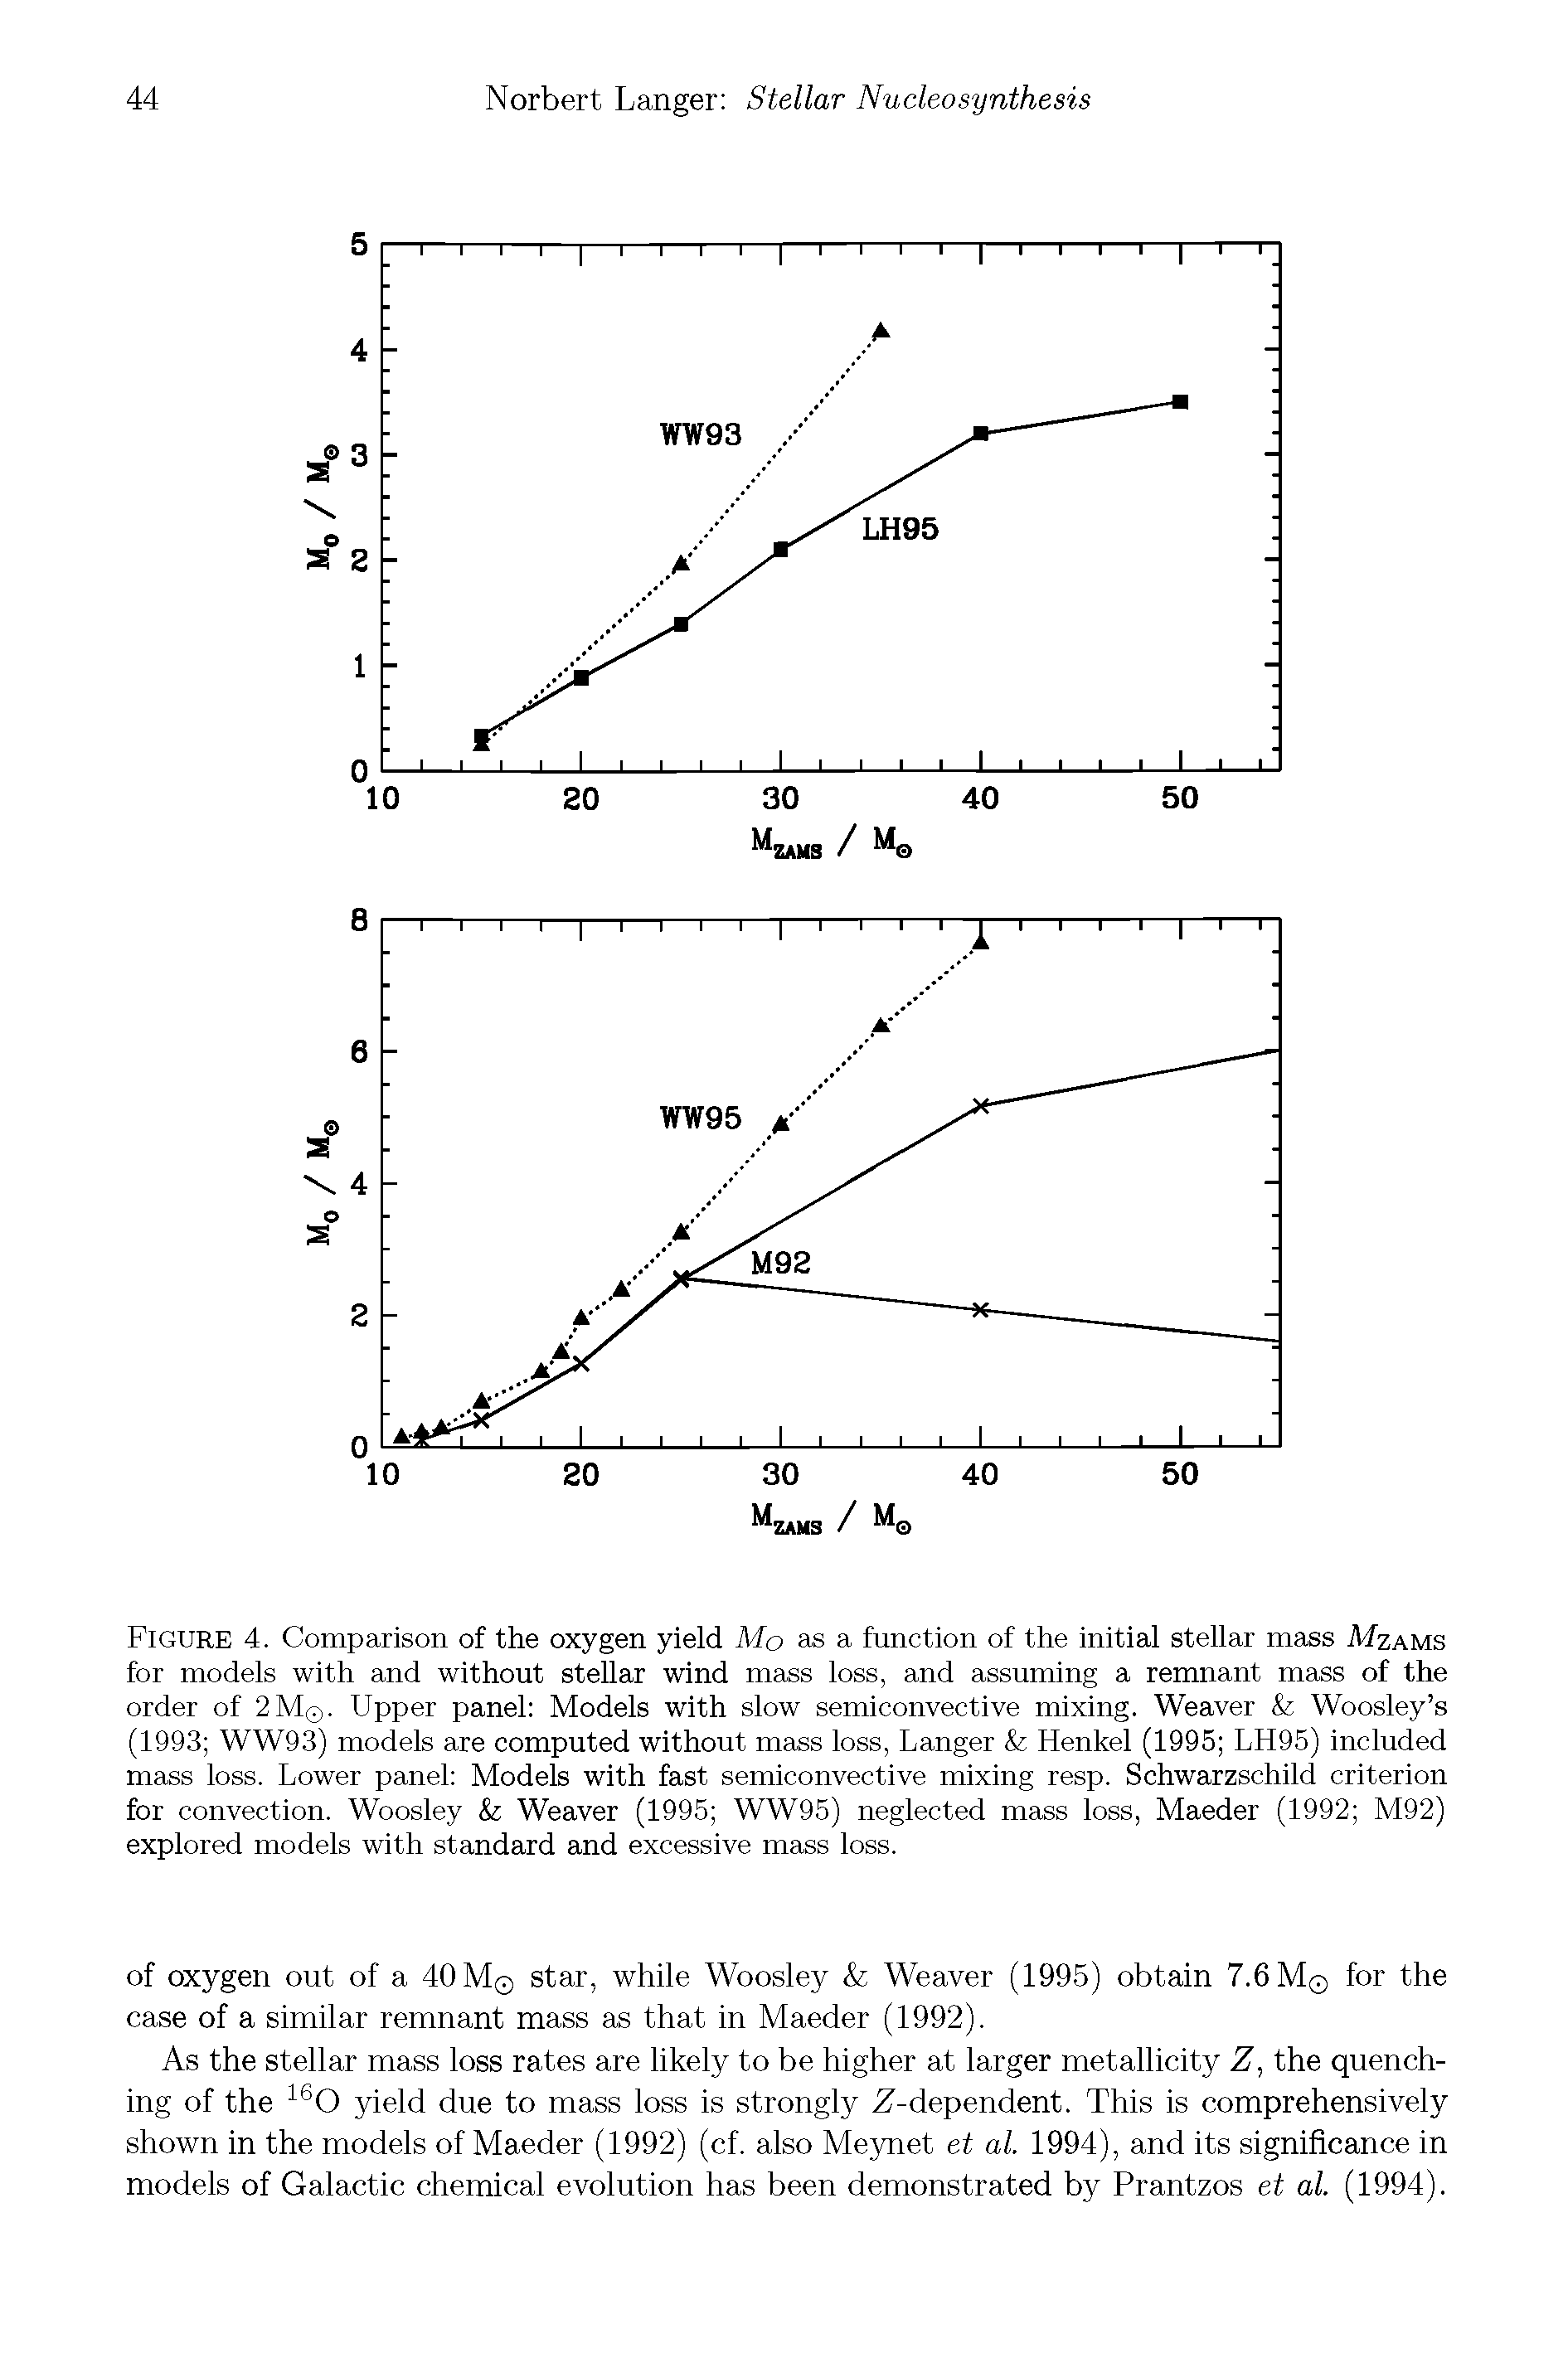 Figure 4. Comparison of the oxygen yield Mo as a function of the initial stellar mass Mzams for models with and without stellar wind mass loss, and assuming a remnant mass of the order of 2Mq. Upper panel Models with slow semiconvective mixing. Weaver Woosley s (1993 WW93) models are computed without mass loss, Langer Henkel (1995 LH95) included mass loss. Lower panel Models with fast semiconvective mixing resp. Schwarzschild criterion for convection. Woosley Weaver (1995 WW95) neglected mass loss, Maeder (1992 M92) explored models with standard and excessive mass loss.